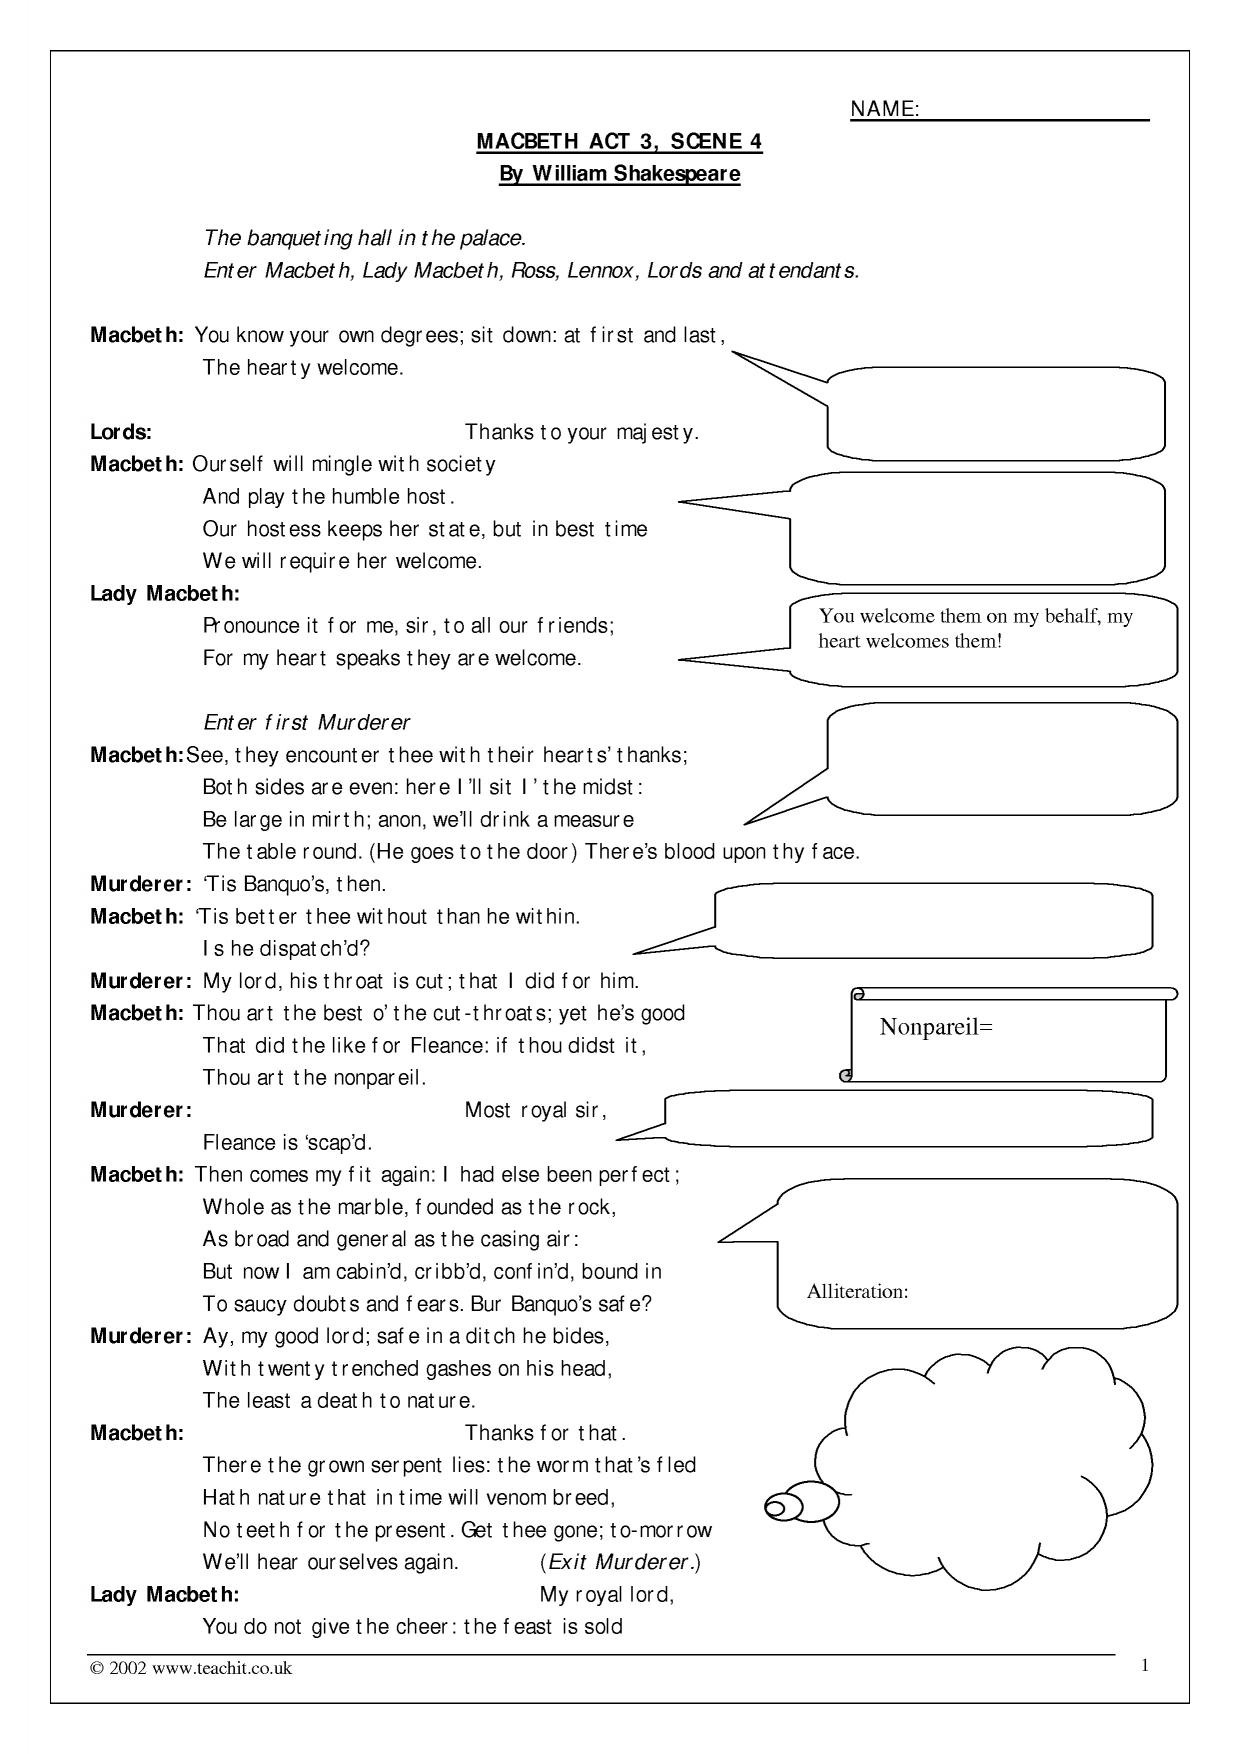 macbeth-vocabulary-worksheet-answers-free-download-goodimg-co